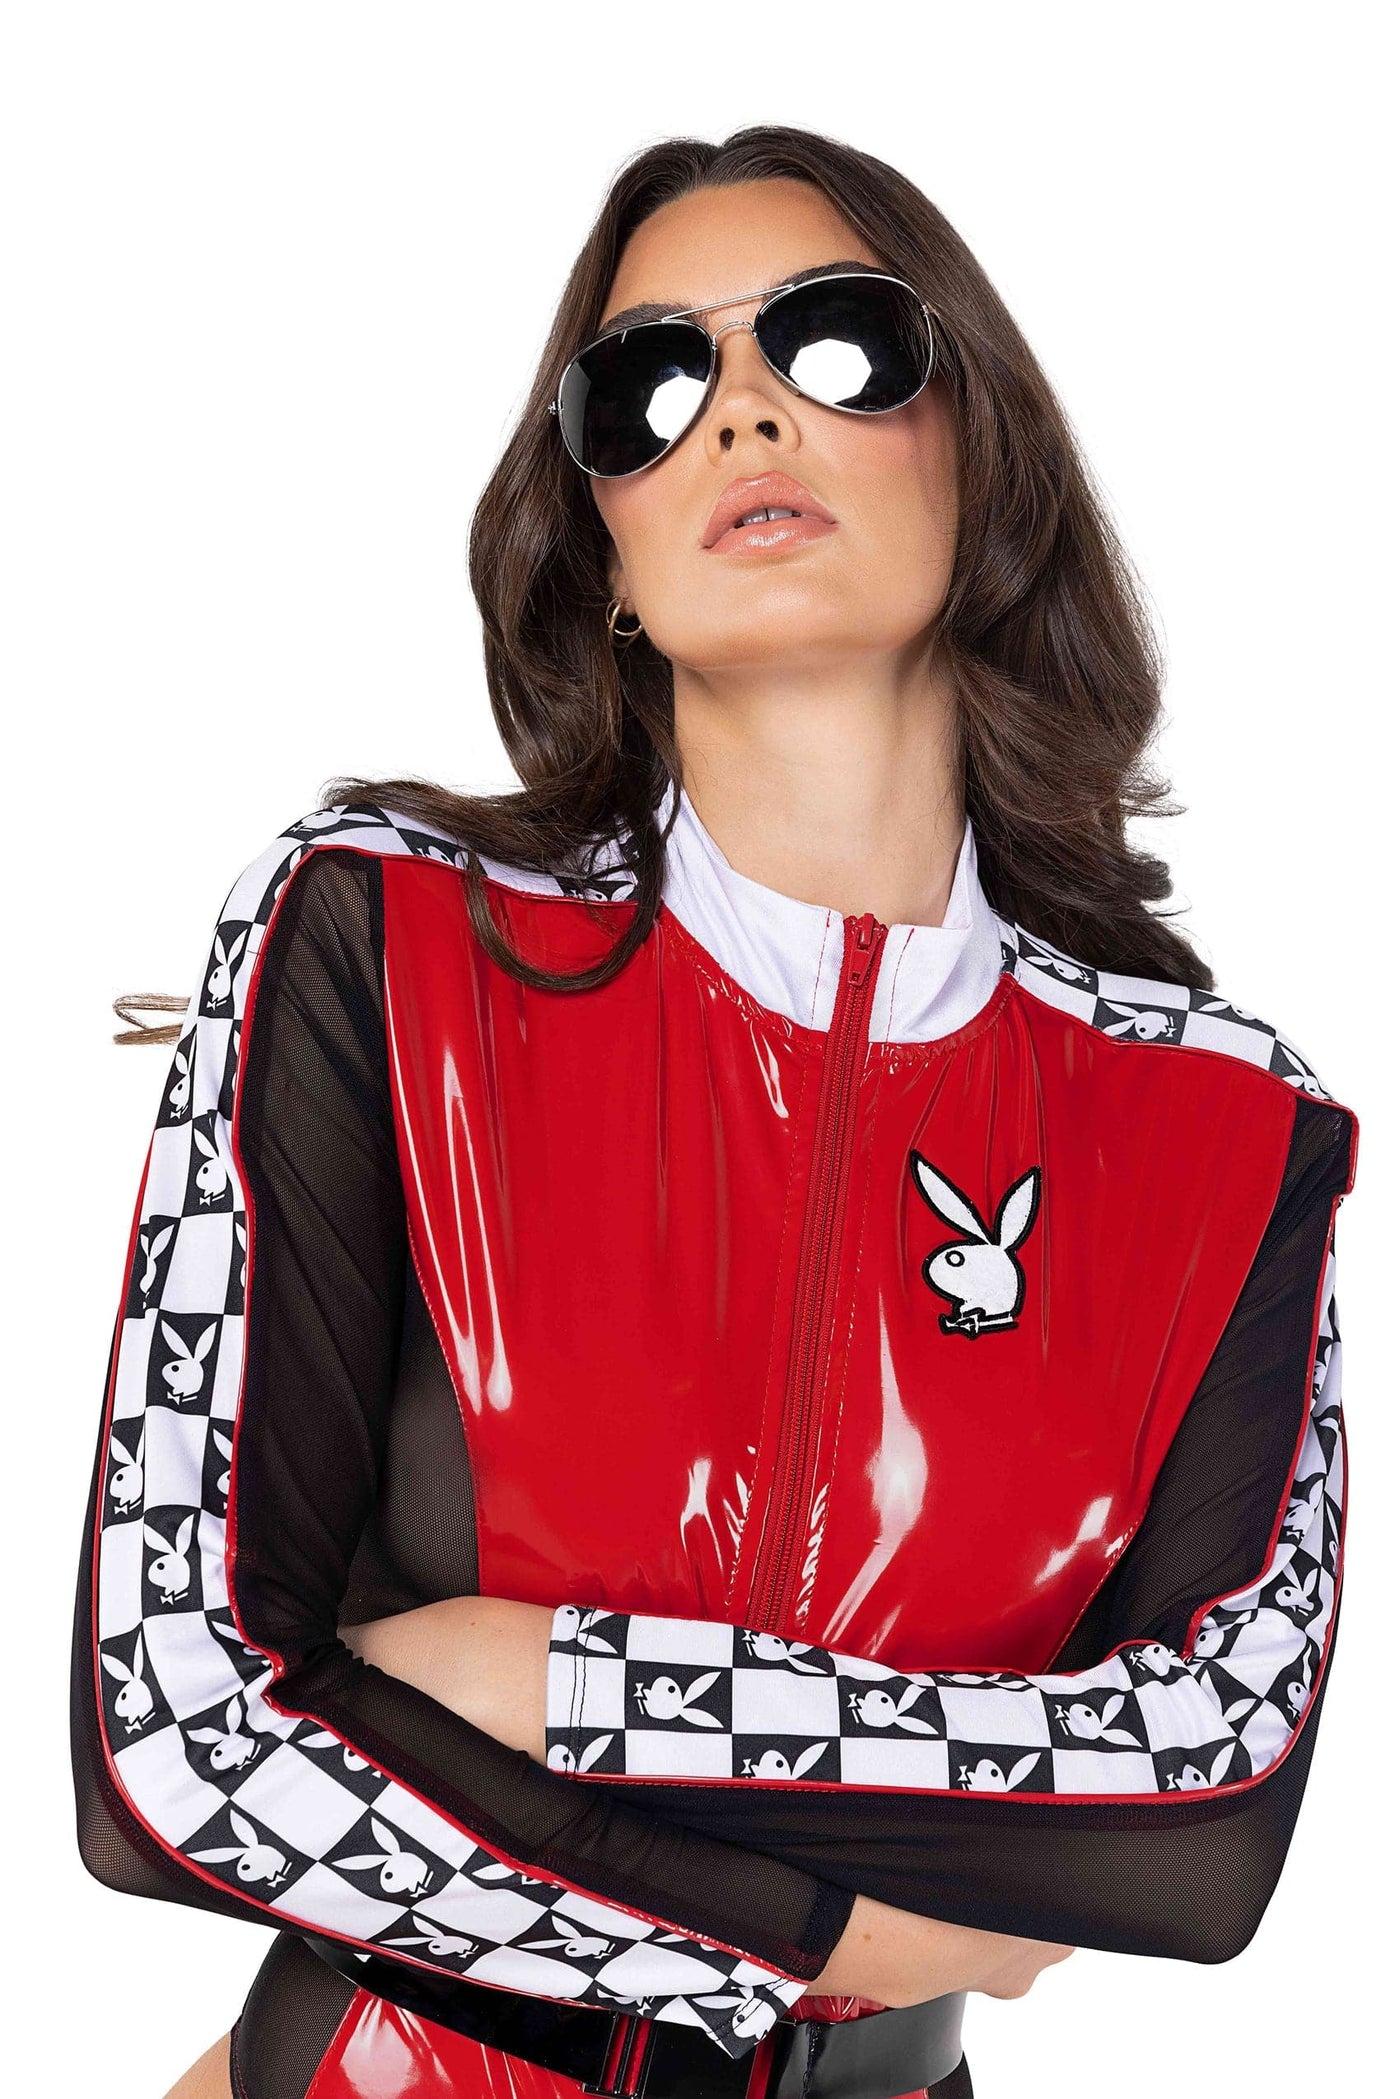 2pc. Official Playboy Bunny Racecar Driver Women's Costume - For Love of Lingerie